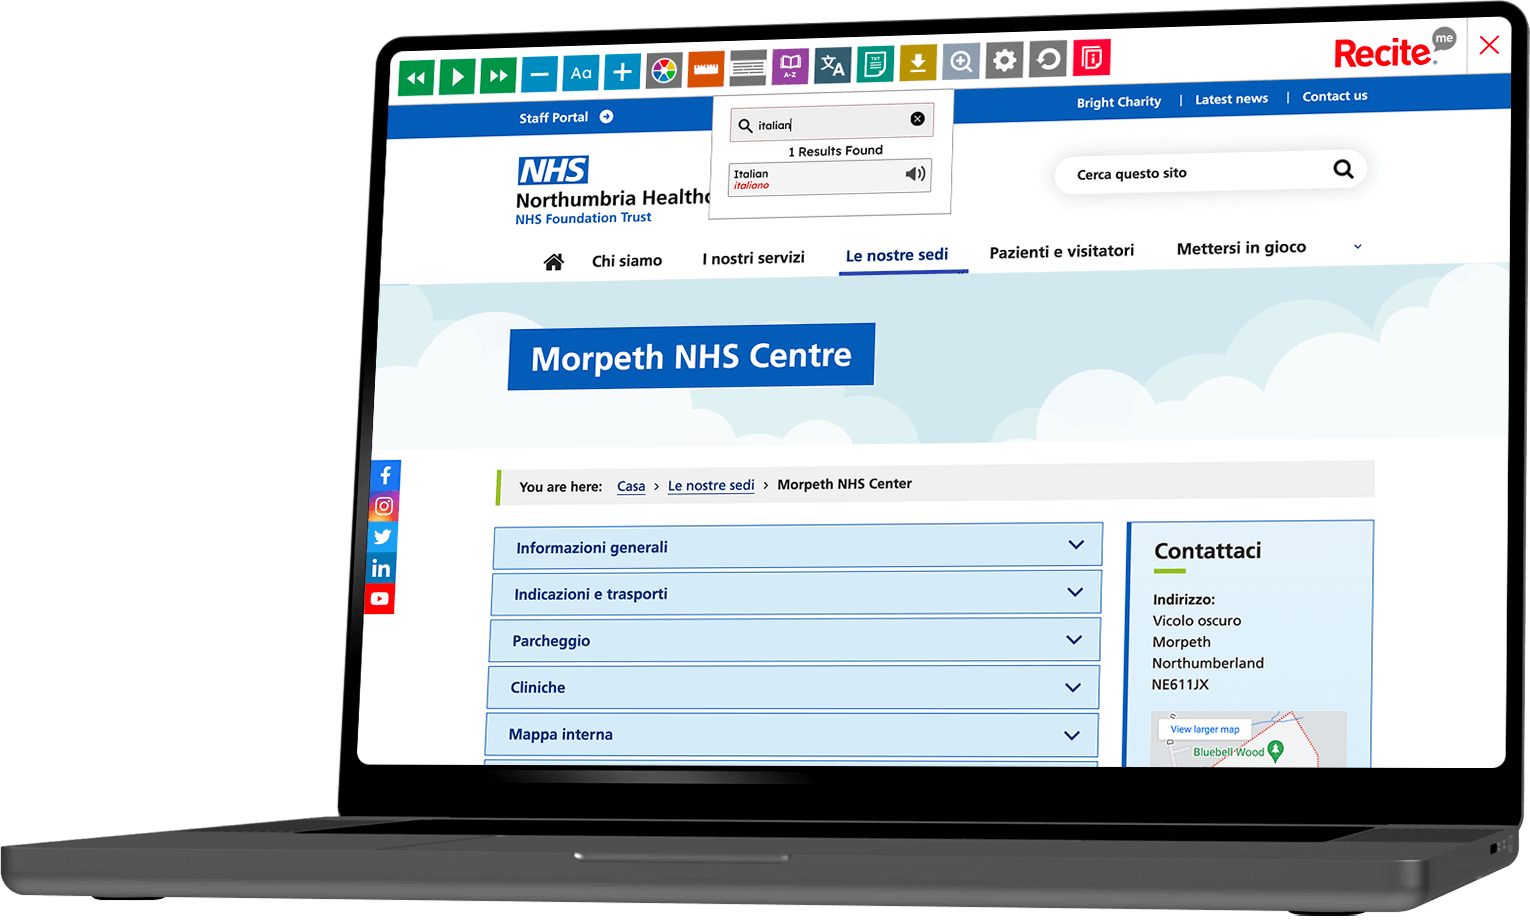 Mock-up of the Recite Me toolbar being used on the Northumbria Healthcare NHS Foundation Trust website.